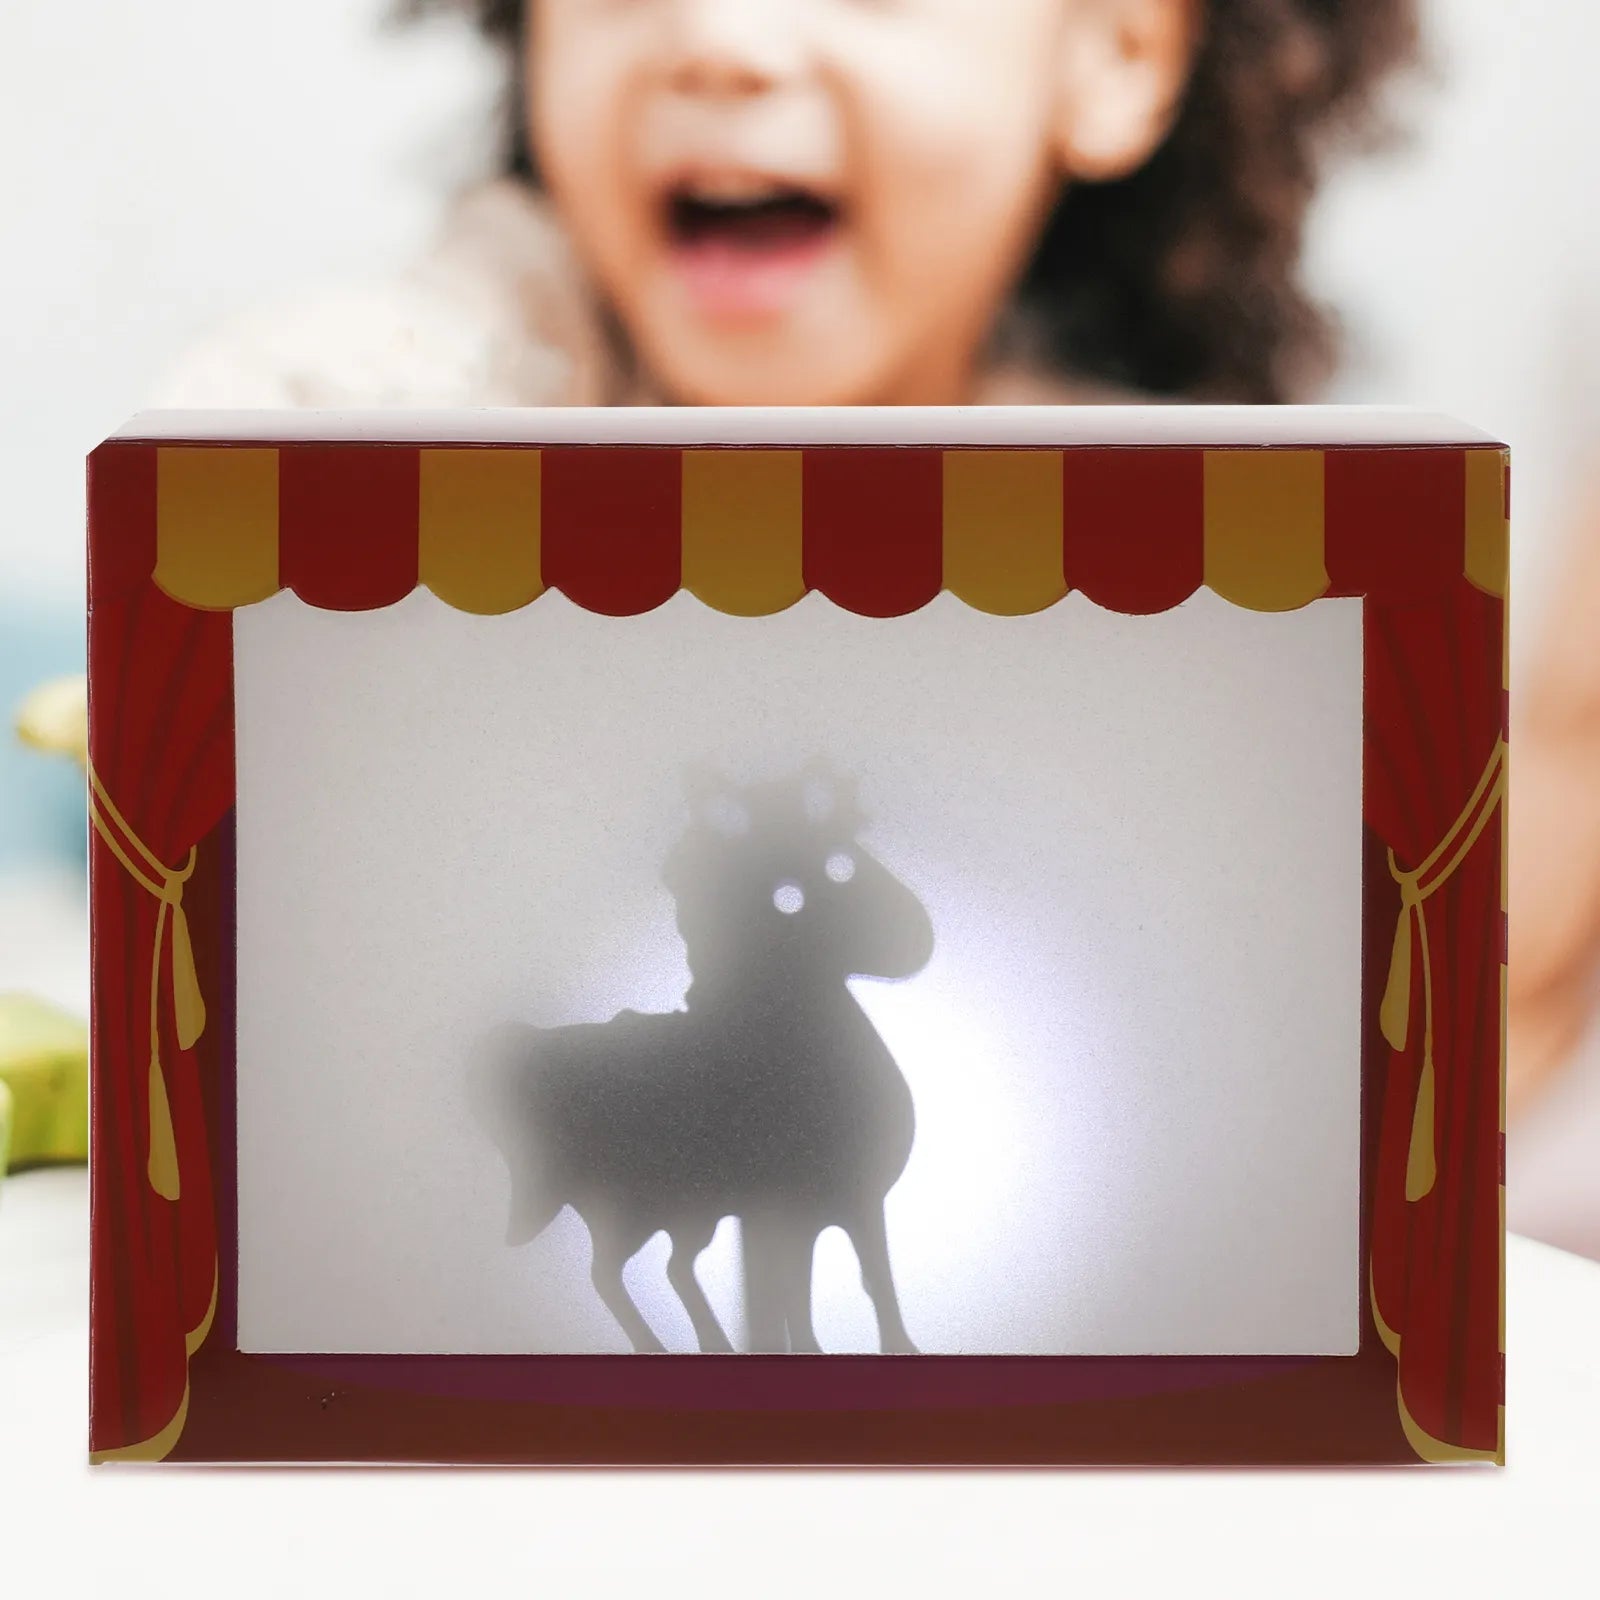 Chinese Shadow Puppetry Kit - Handmade Educational Toy for Kids - ToylandEU